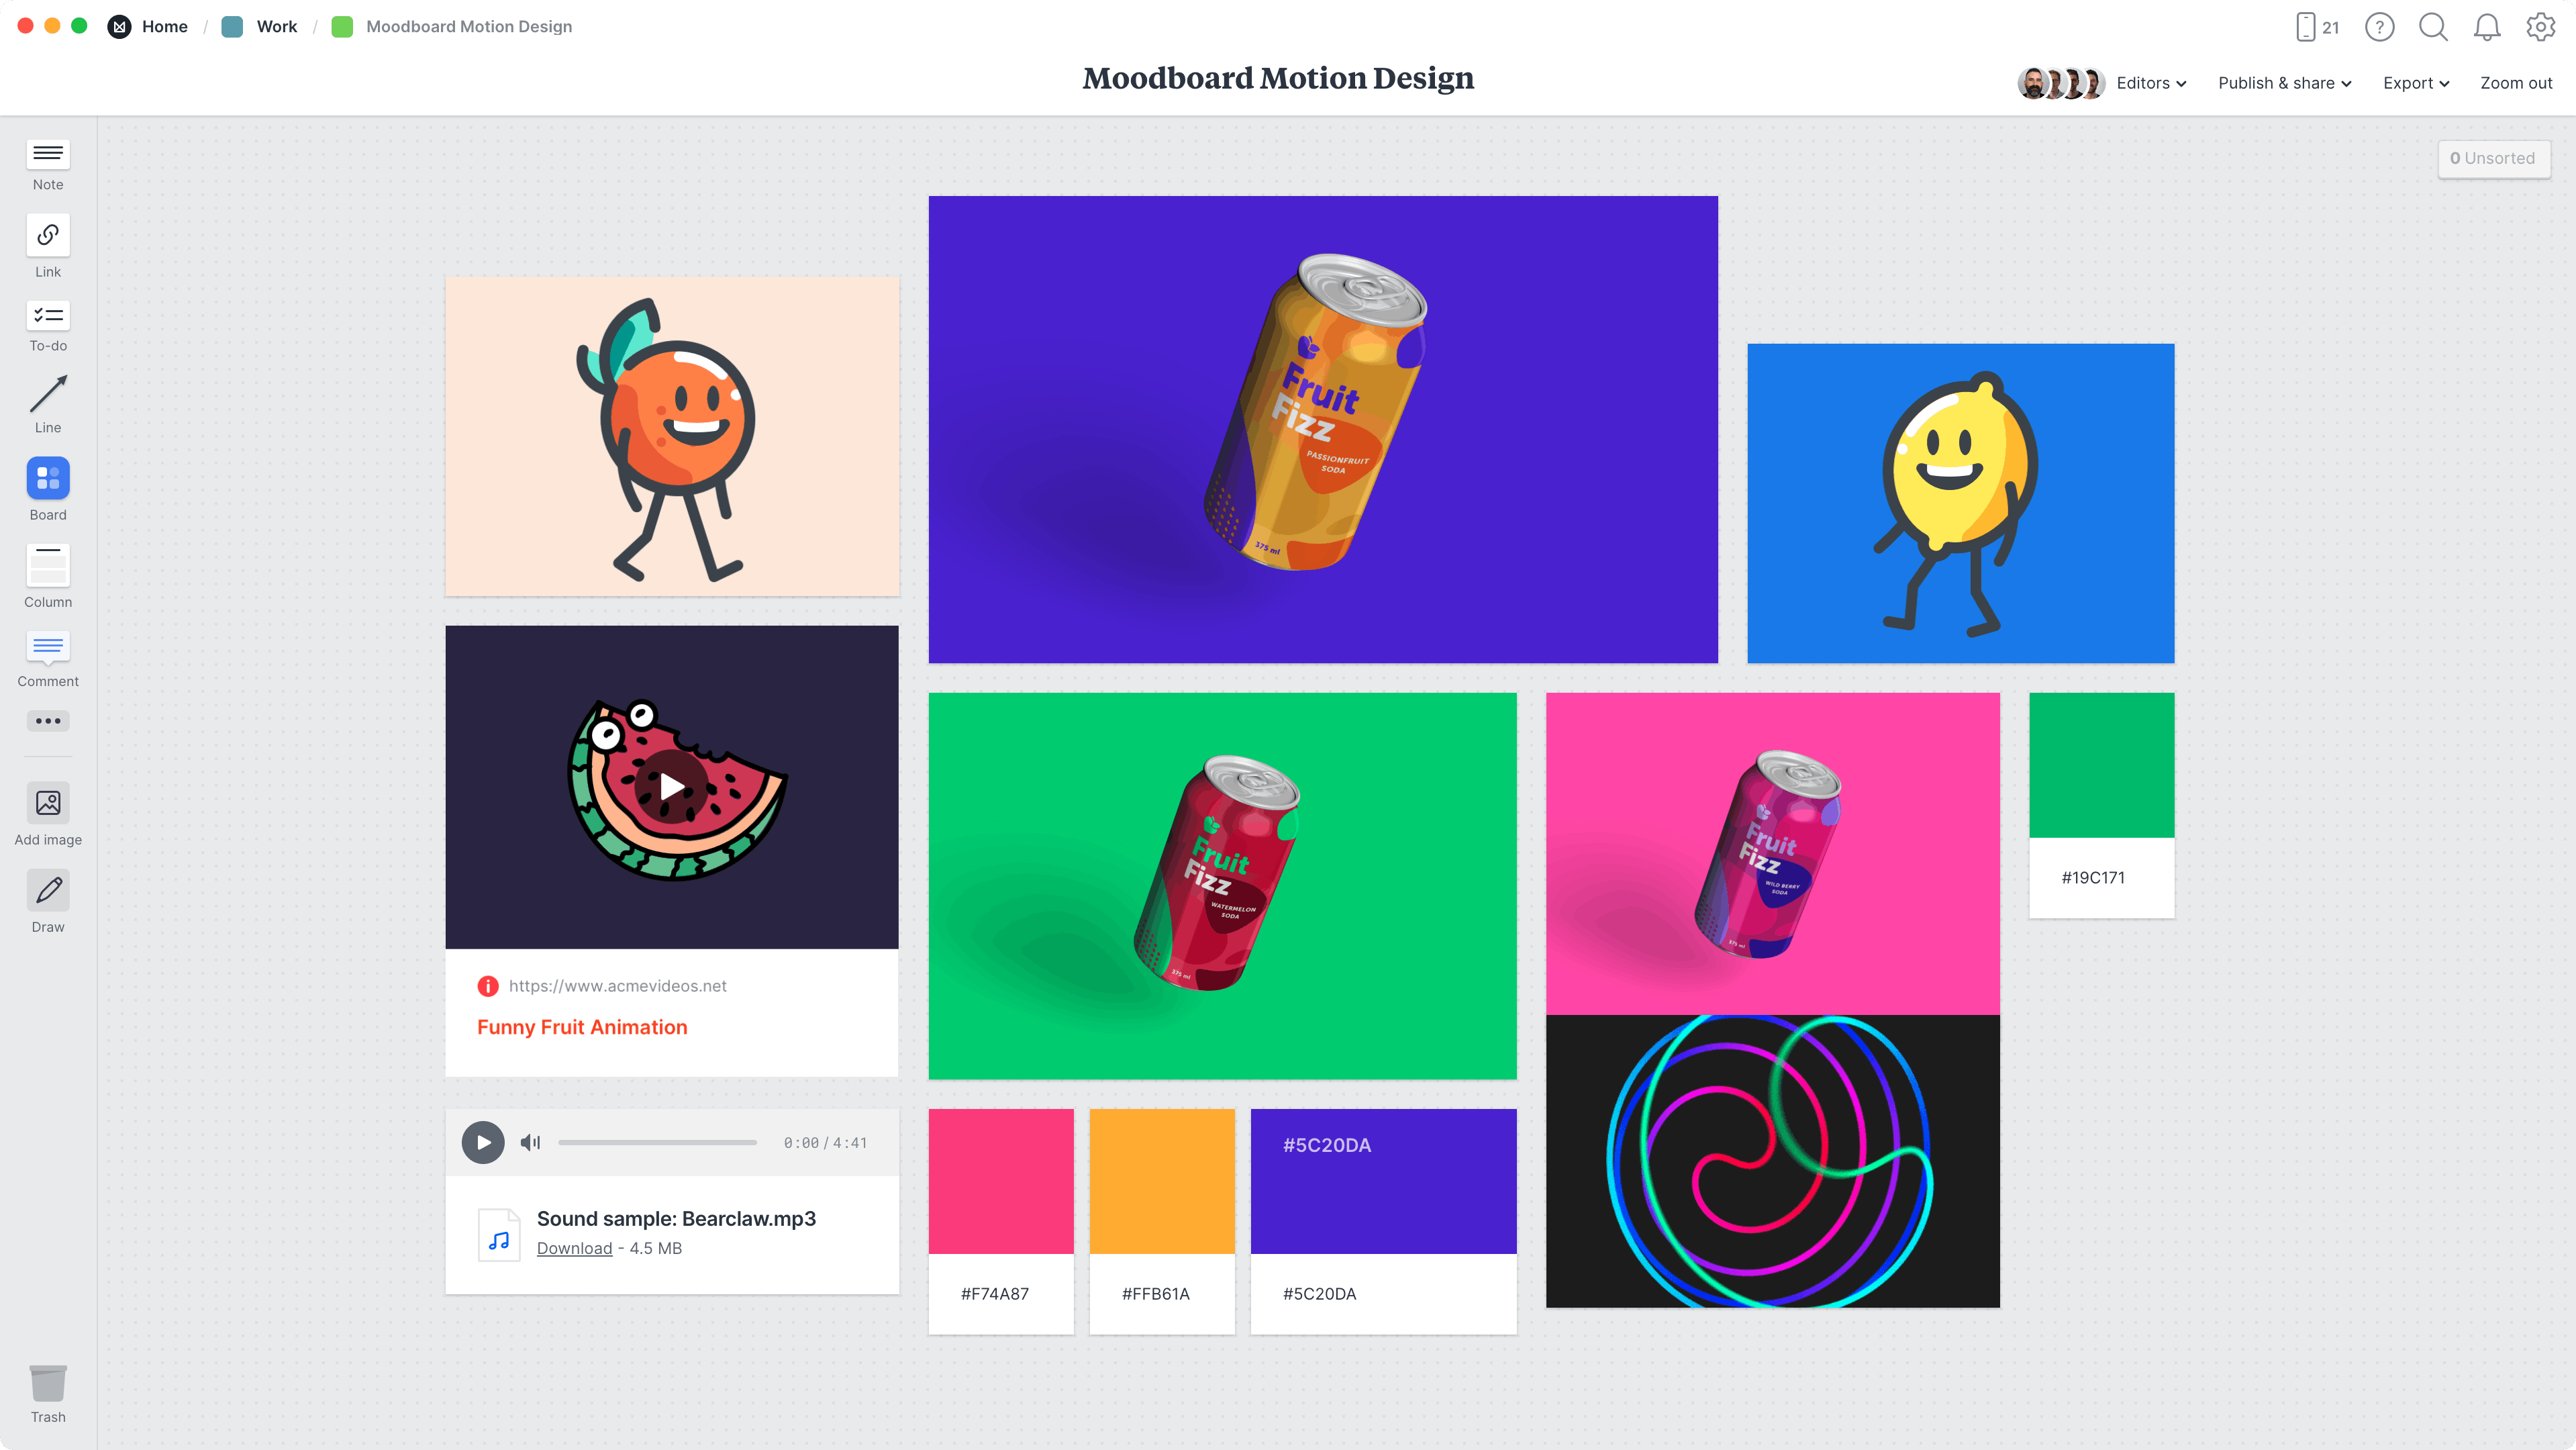 Motion Design Moodboard Template, within the Milanote app